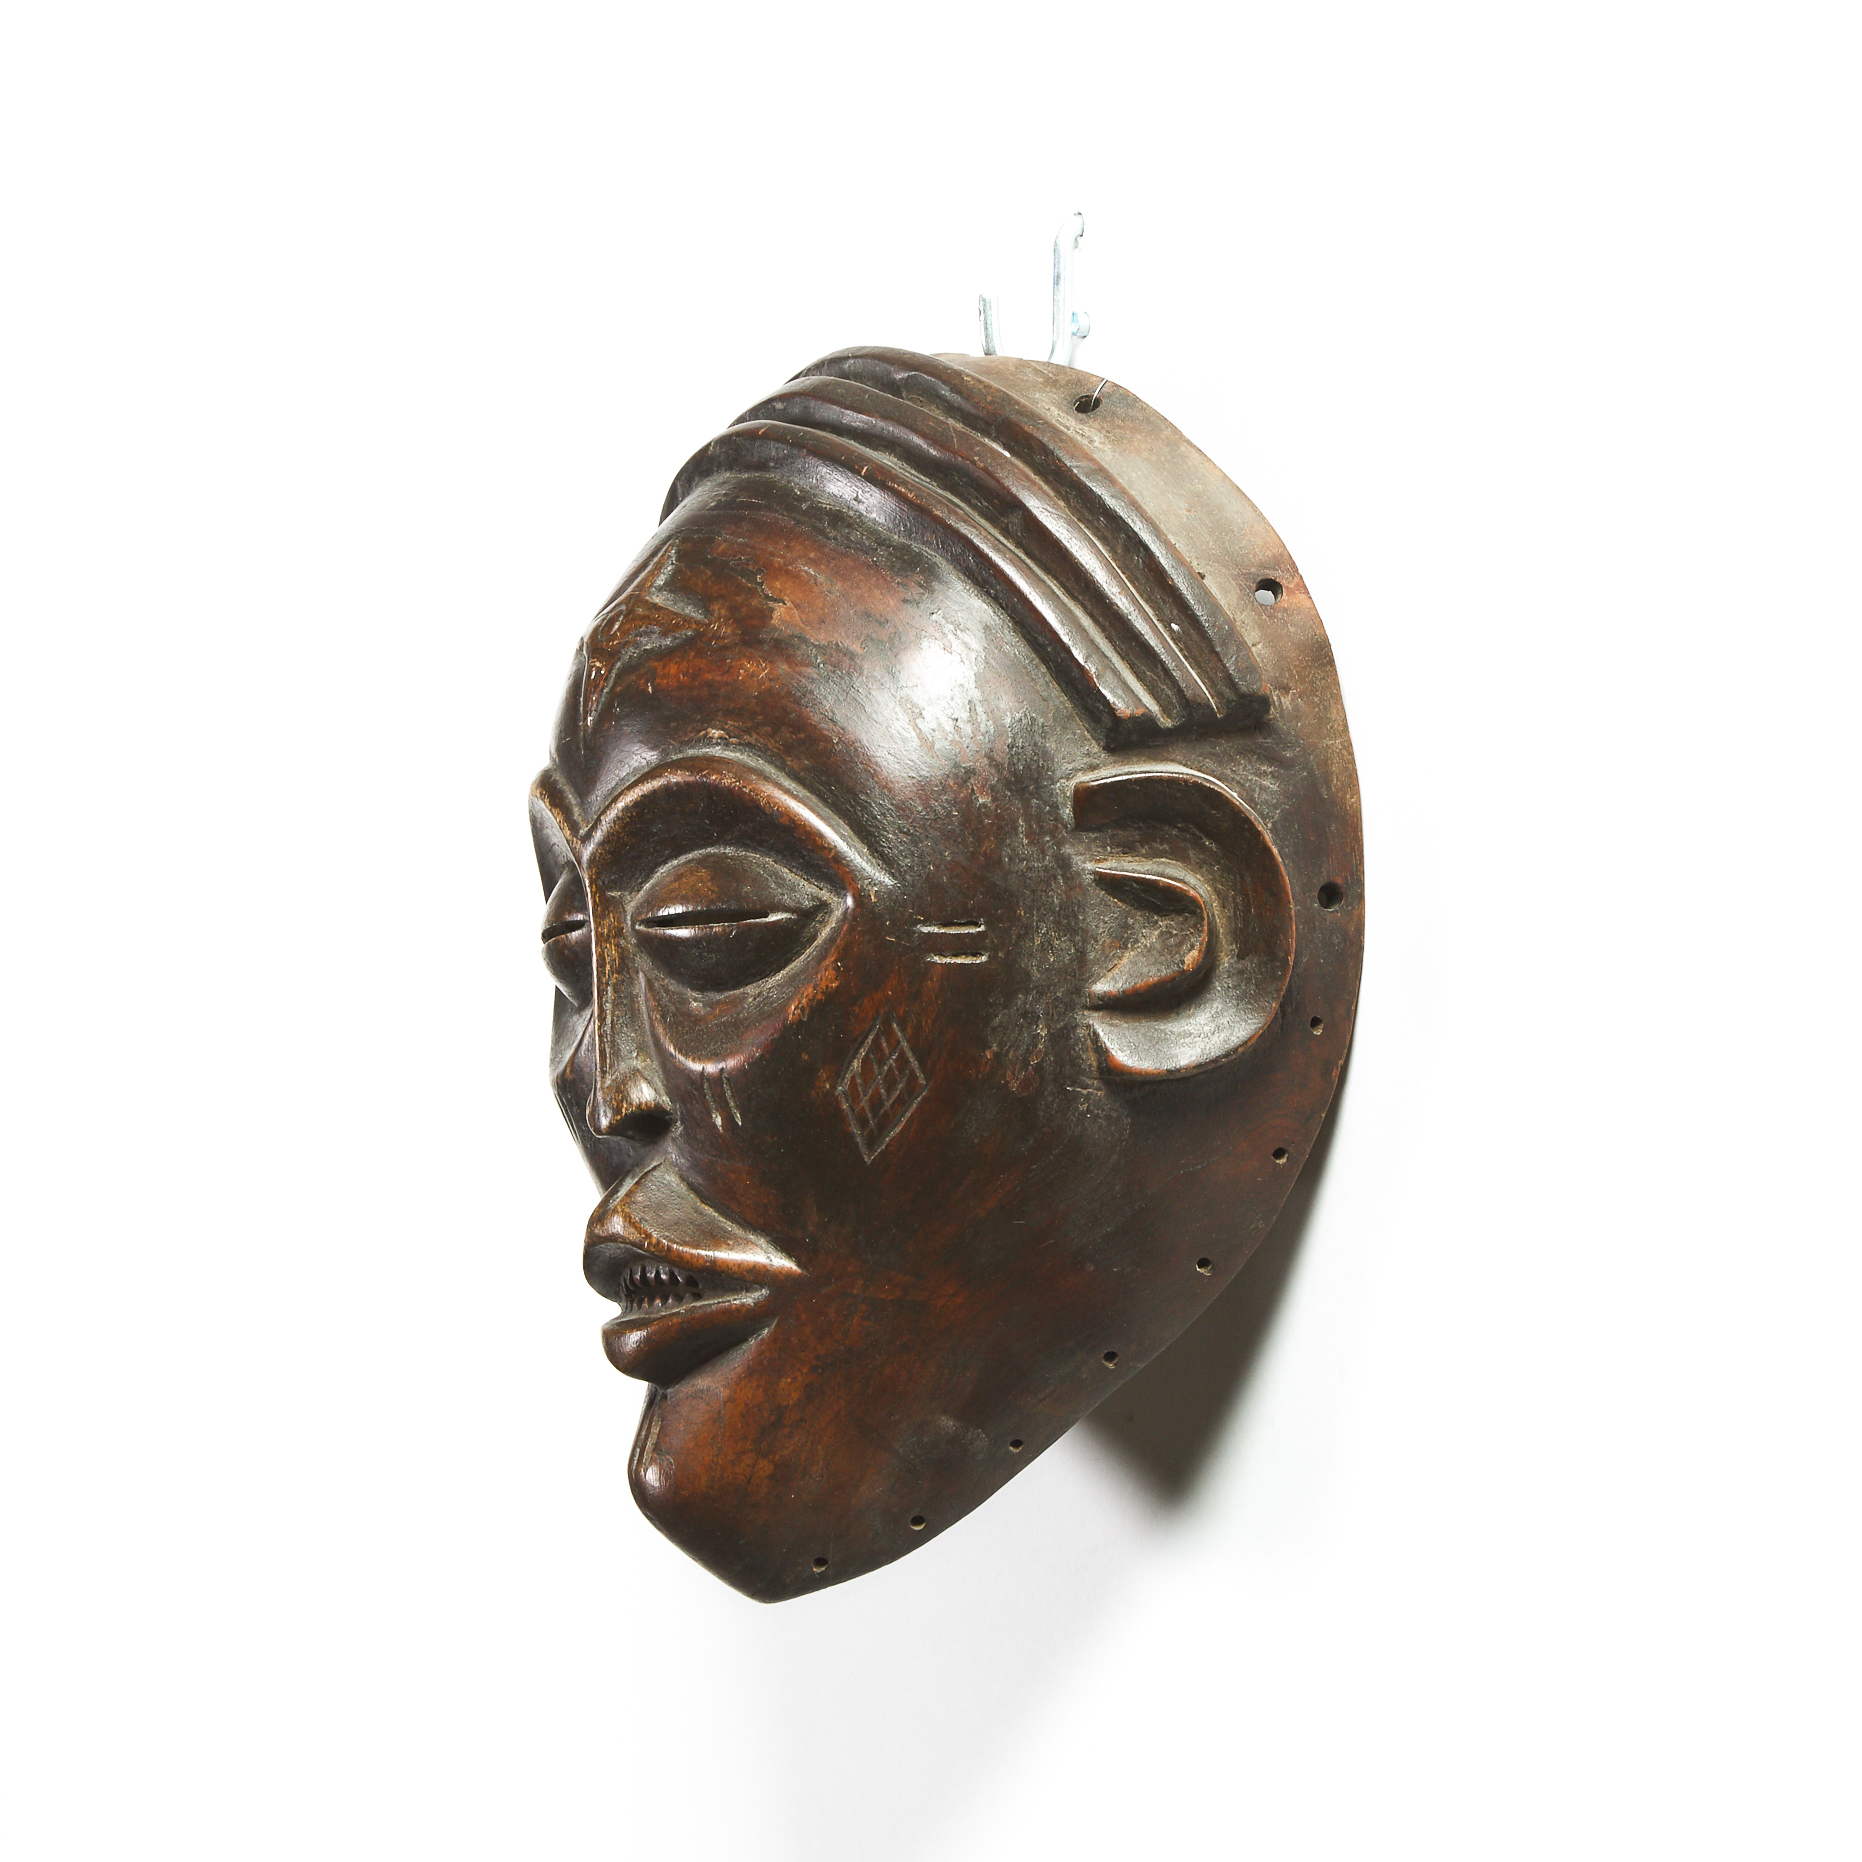 Chokwe Mask, West Africa, mid to late 20th century